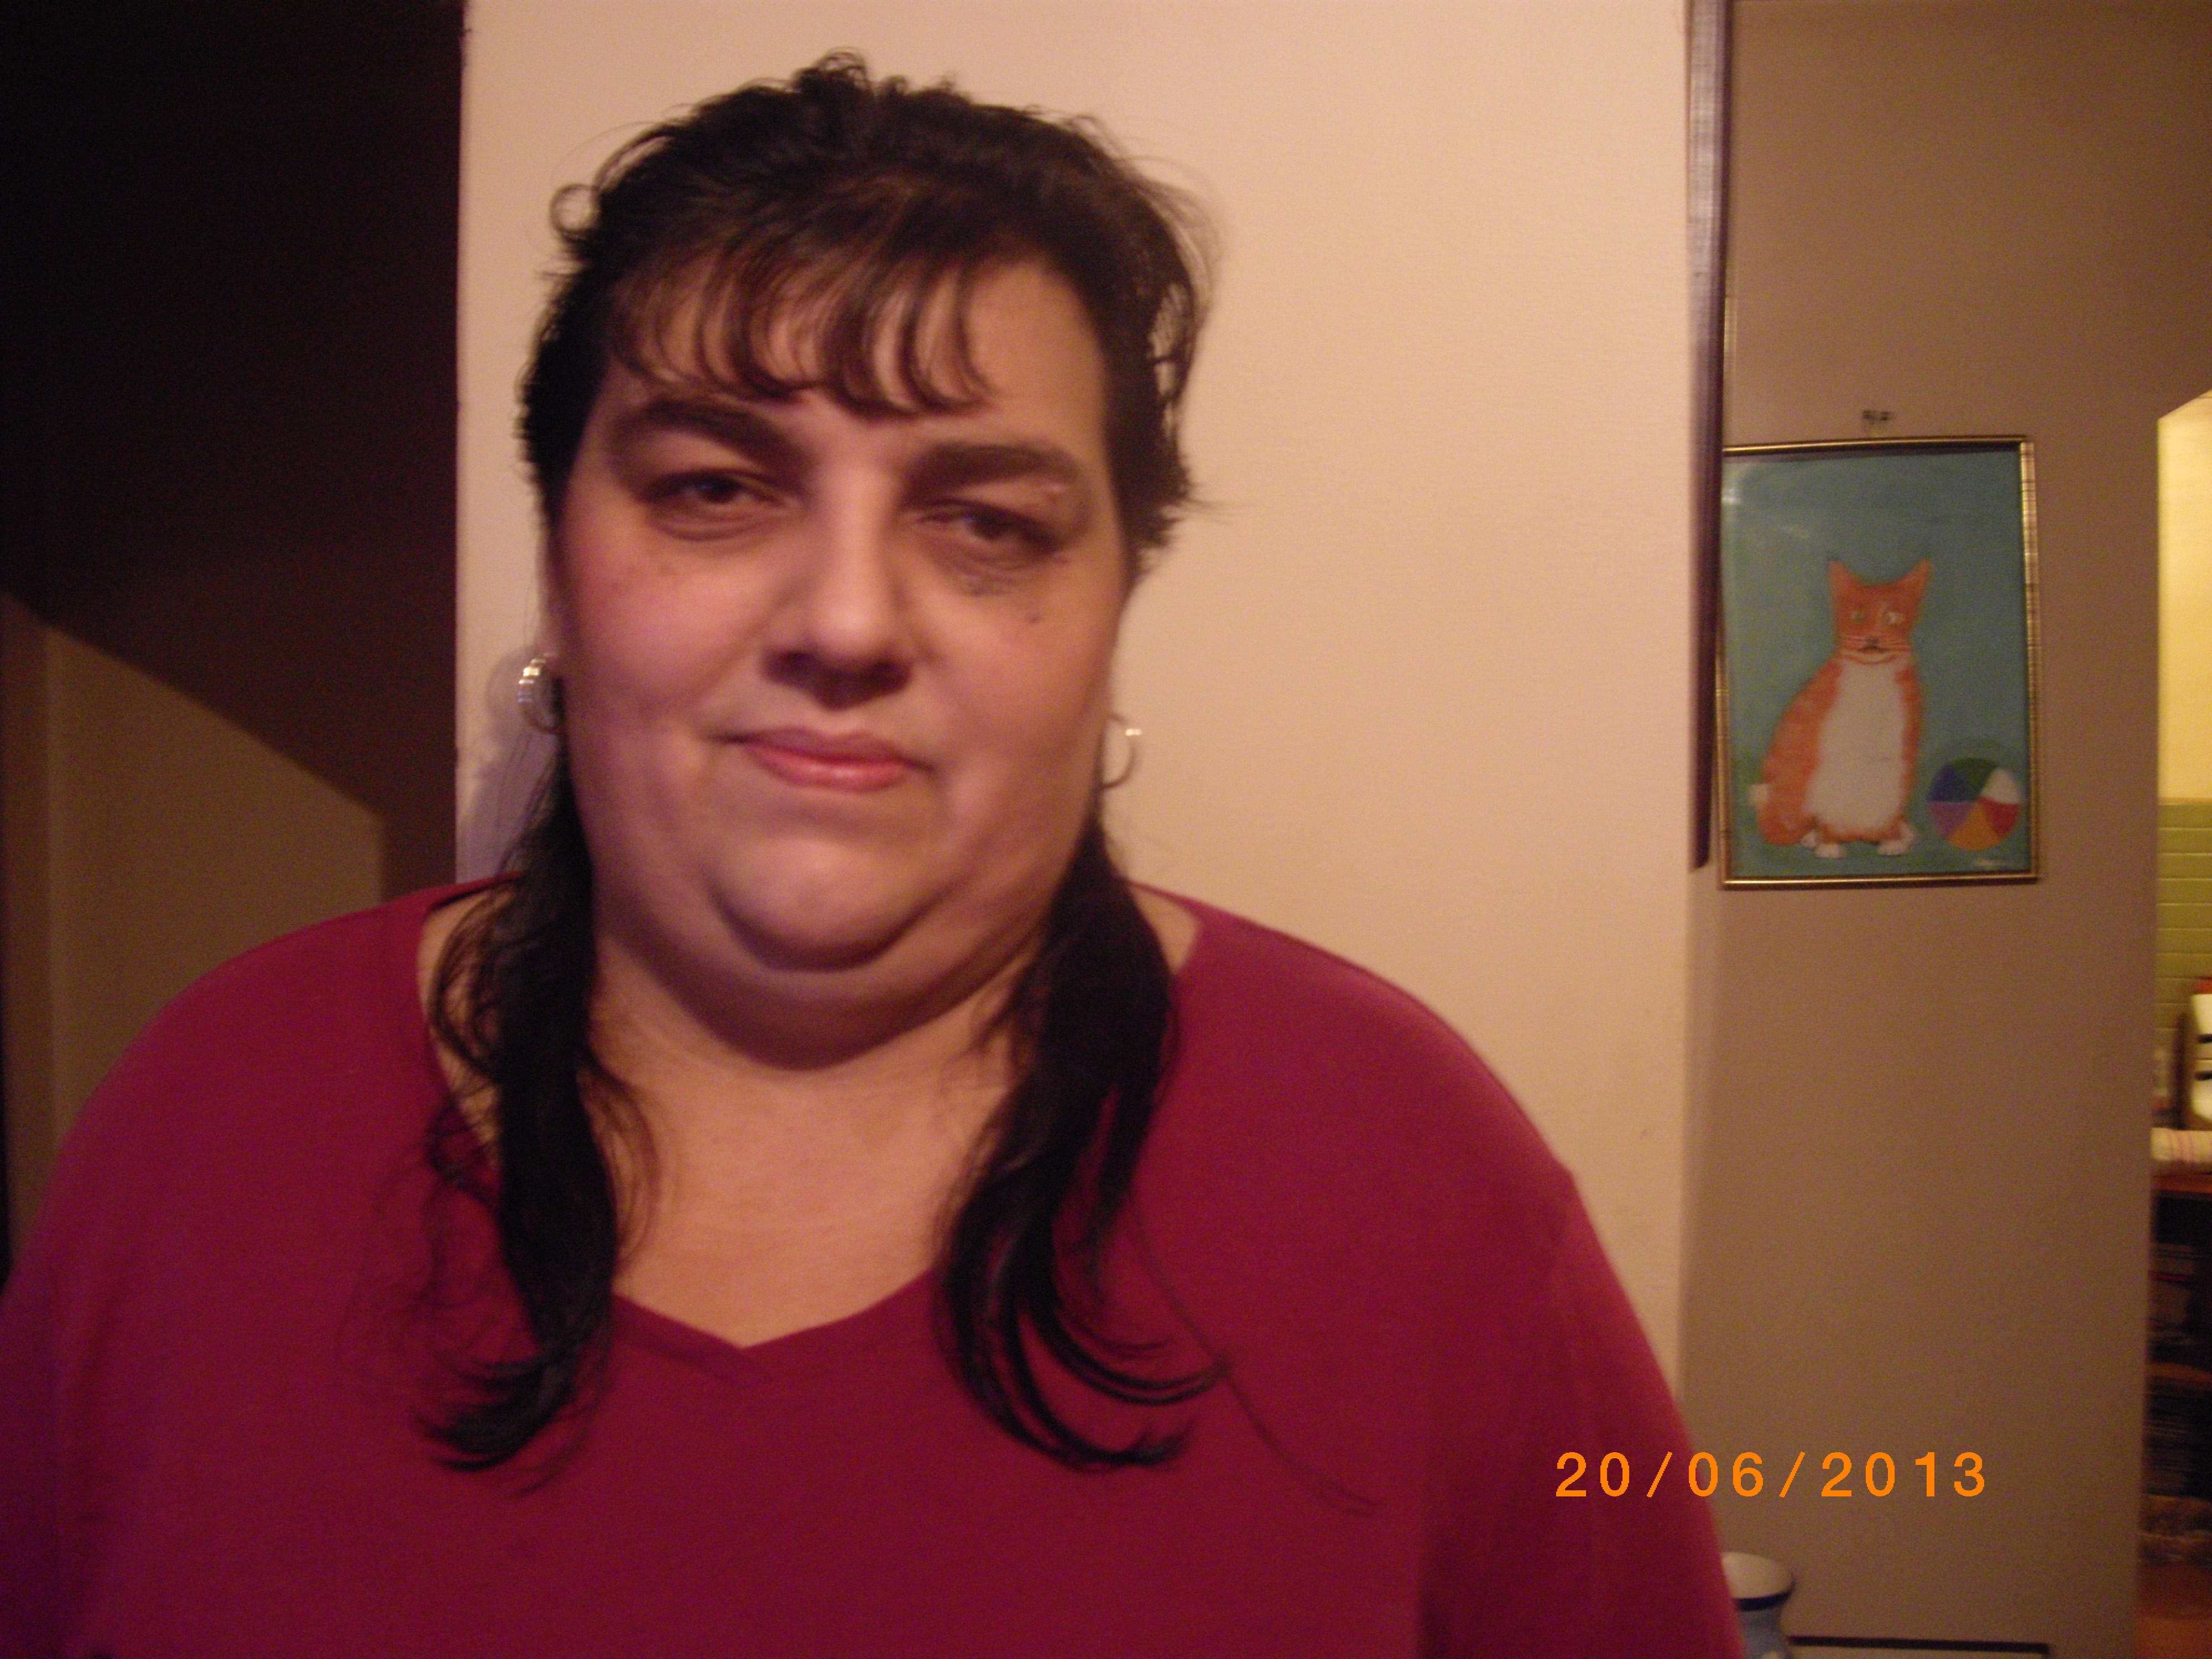 Purplebutterfly - Melbourne Singles. Free online dating in Melbourne, Victoria.